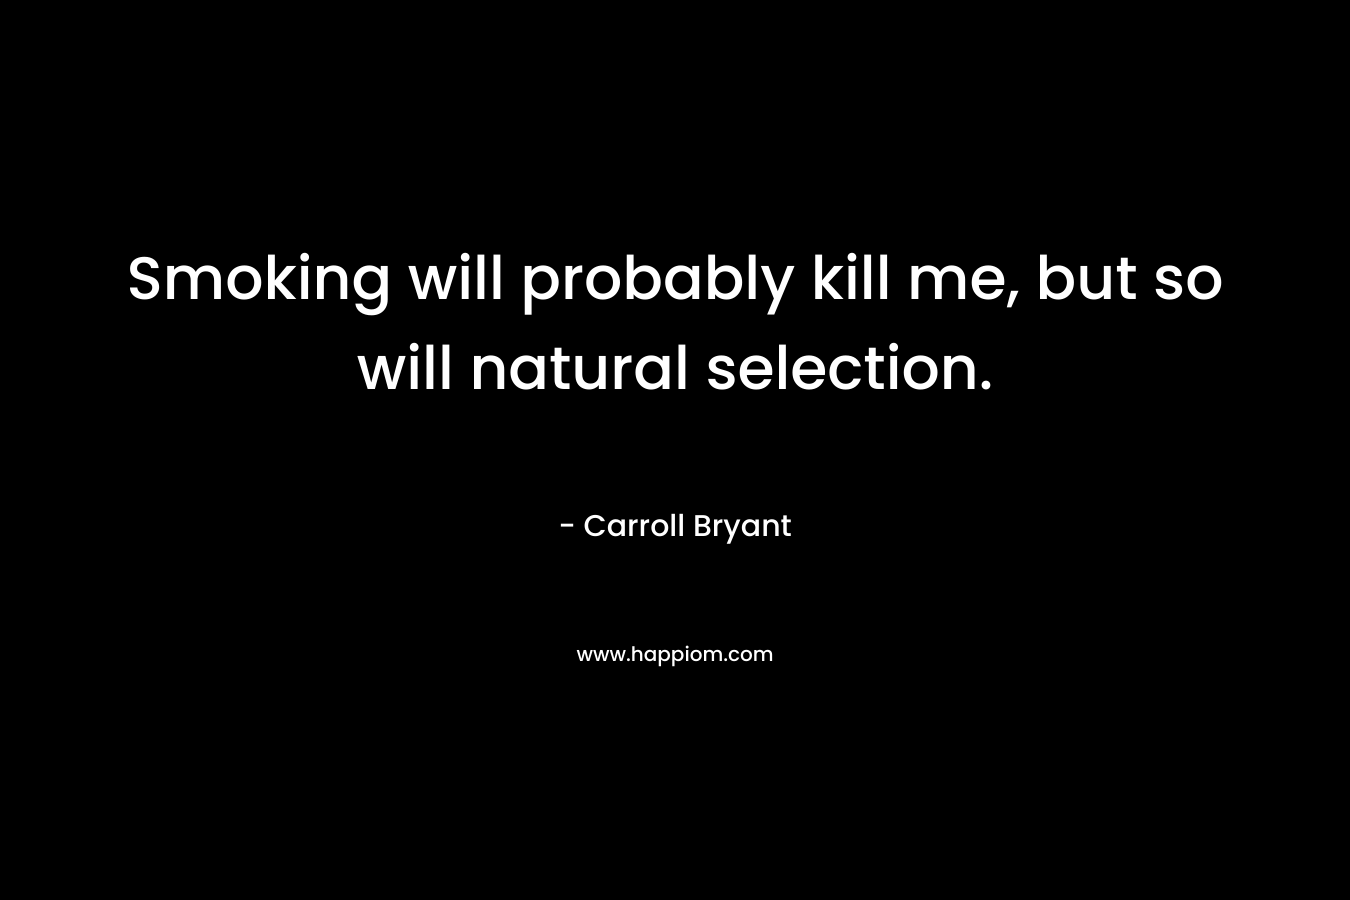 Smoking will probably kill me, but so will natural selection. – Carroll Bryant